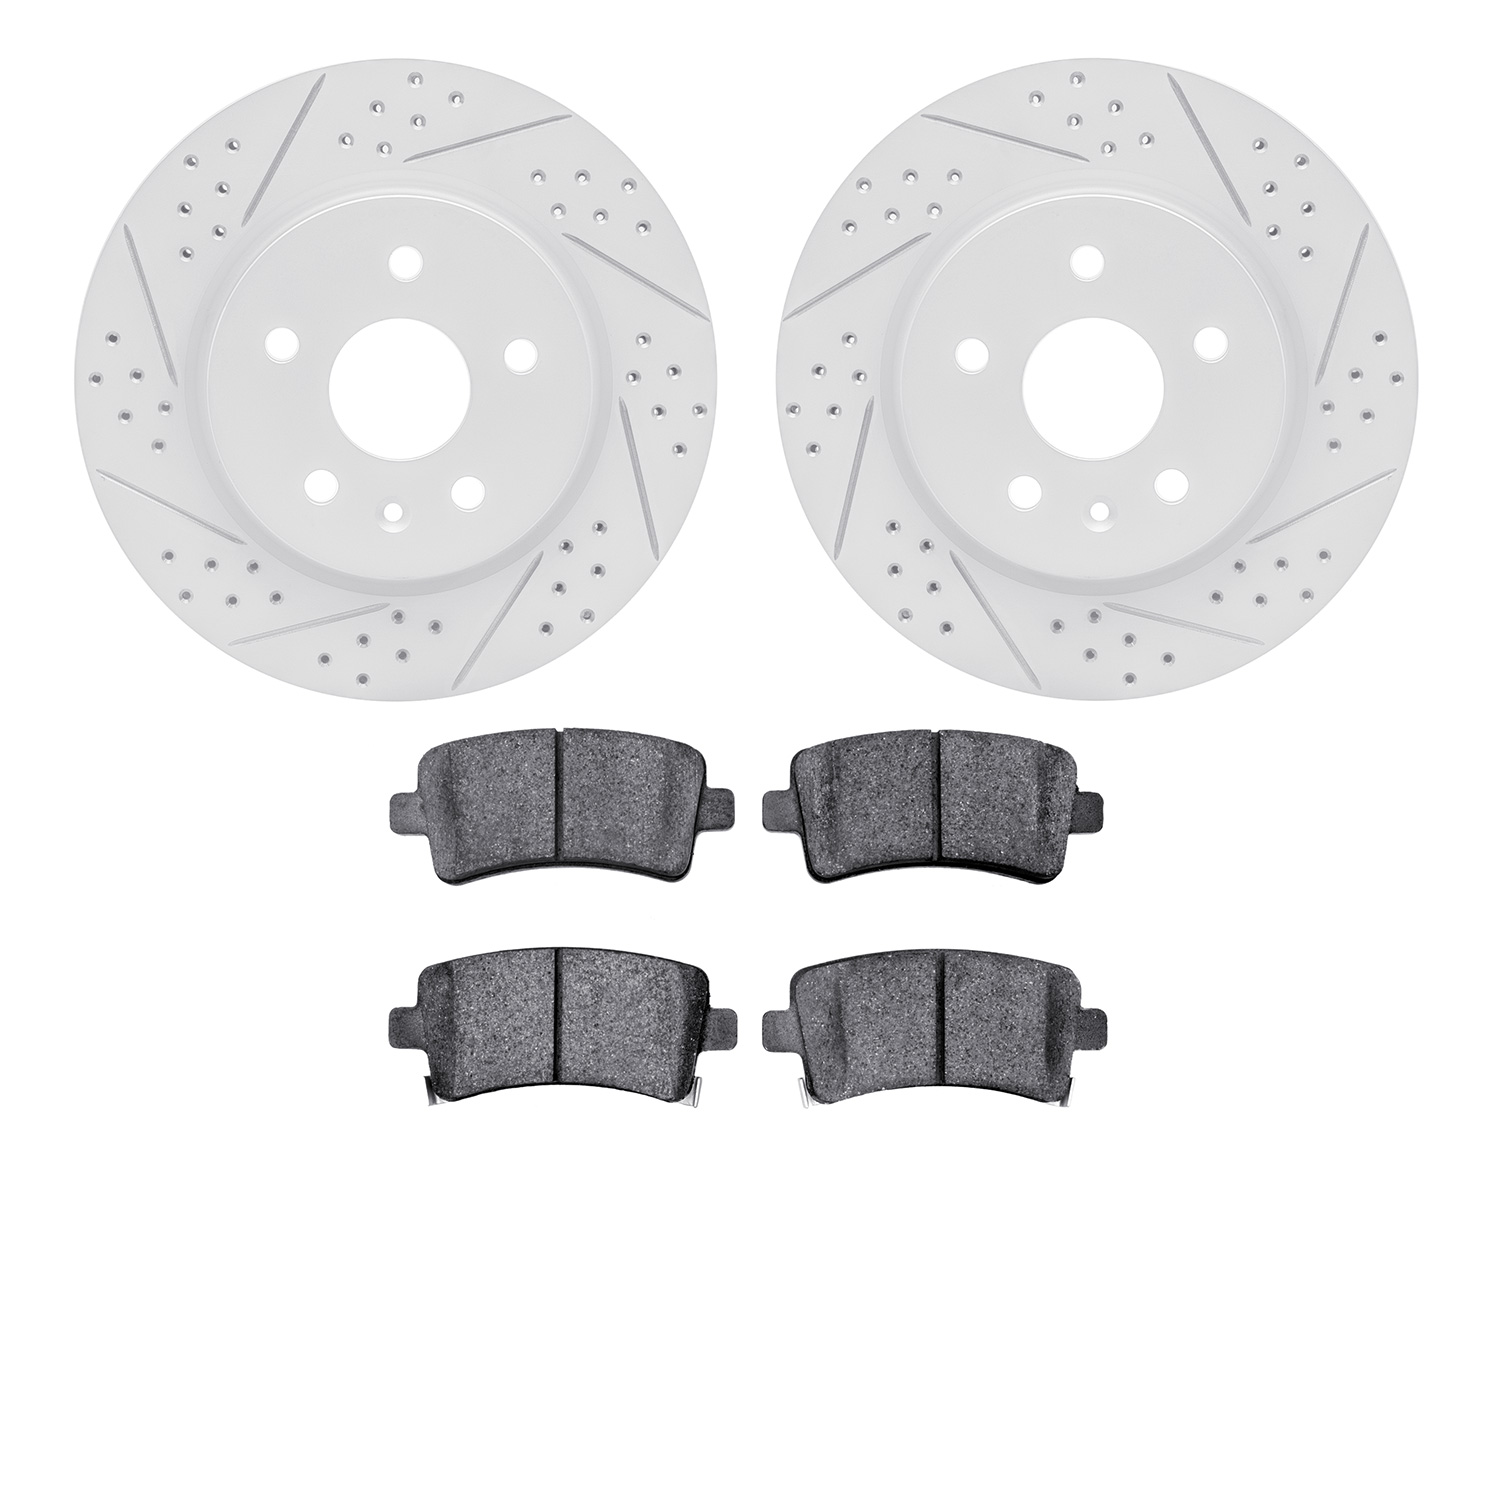 2502-65021 Geoperformance Drilled/Slotted Rotors w/5000 Advanced Brake Pads Kit, 2011-2013 GM, Position: Rear